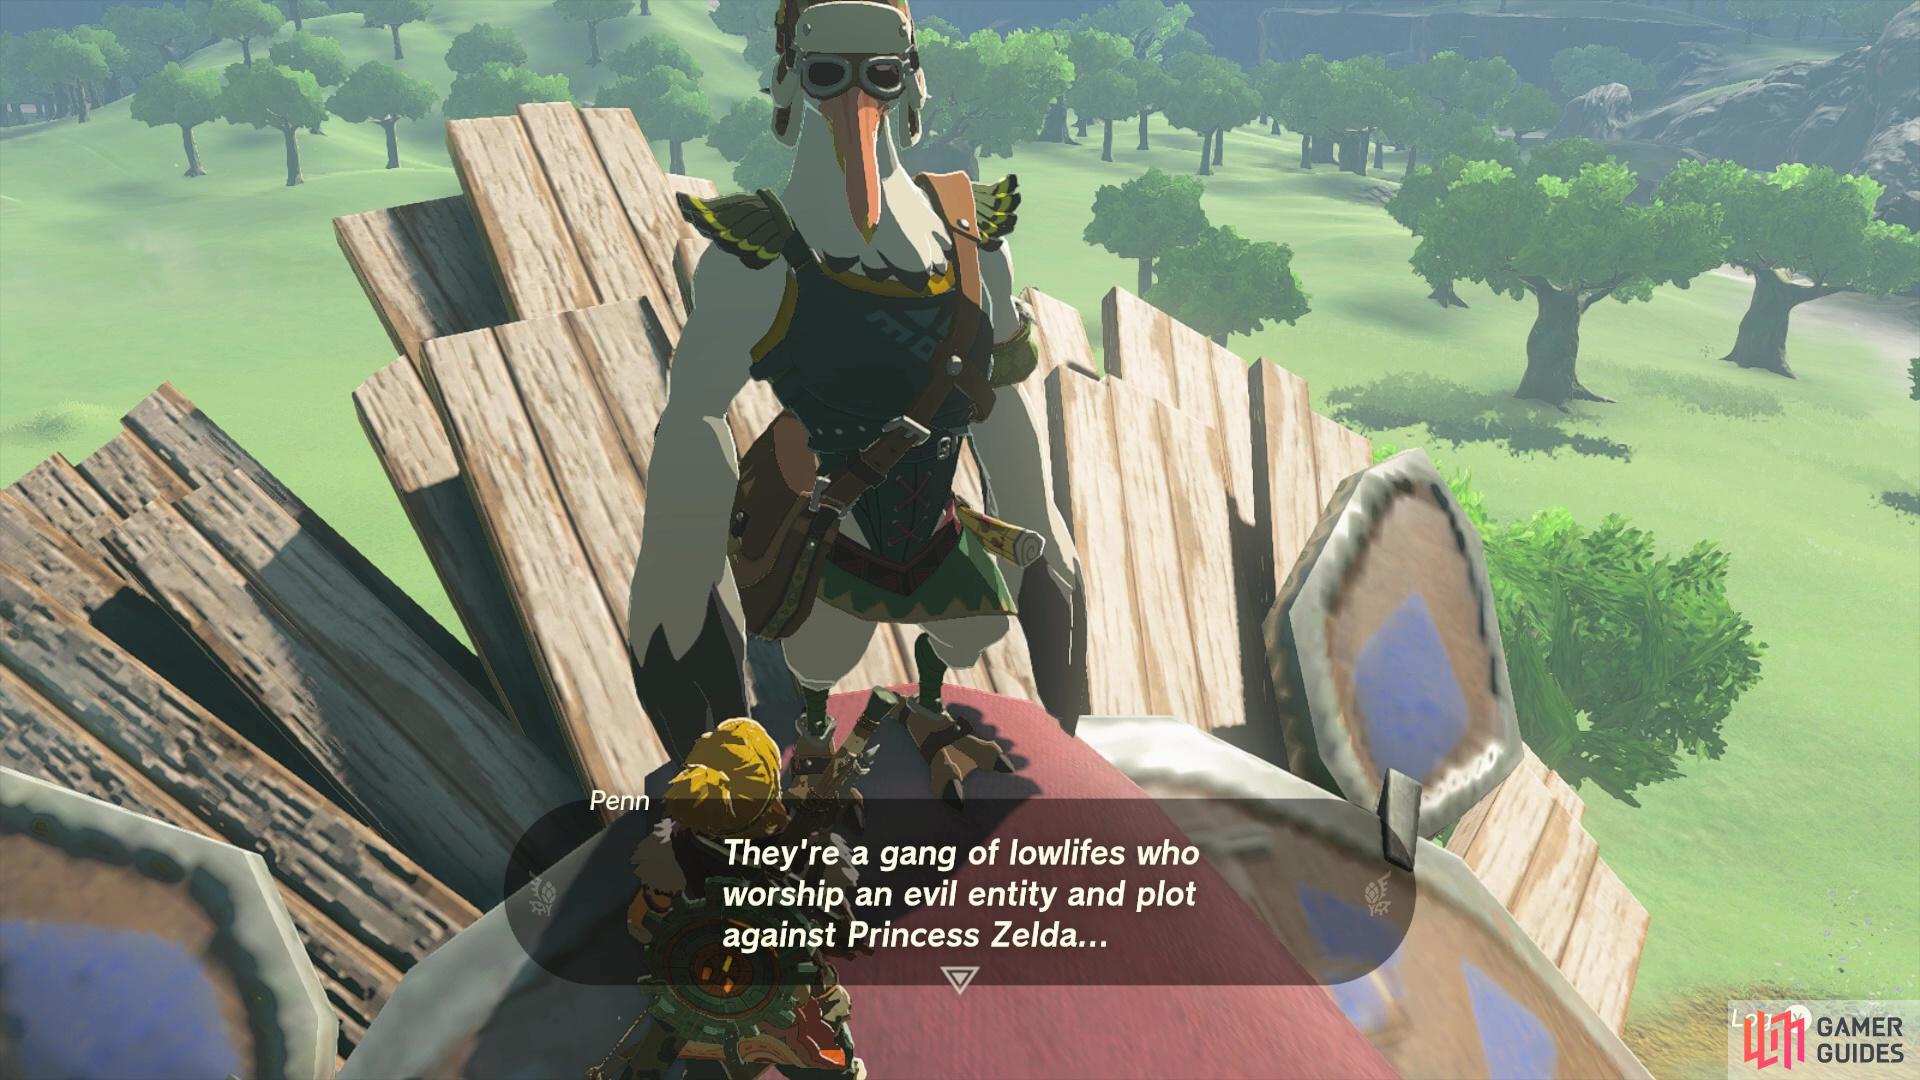 The Yiga Clan have supposedly kidnapped Zelda!